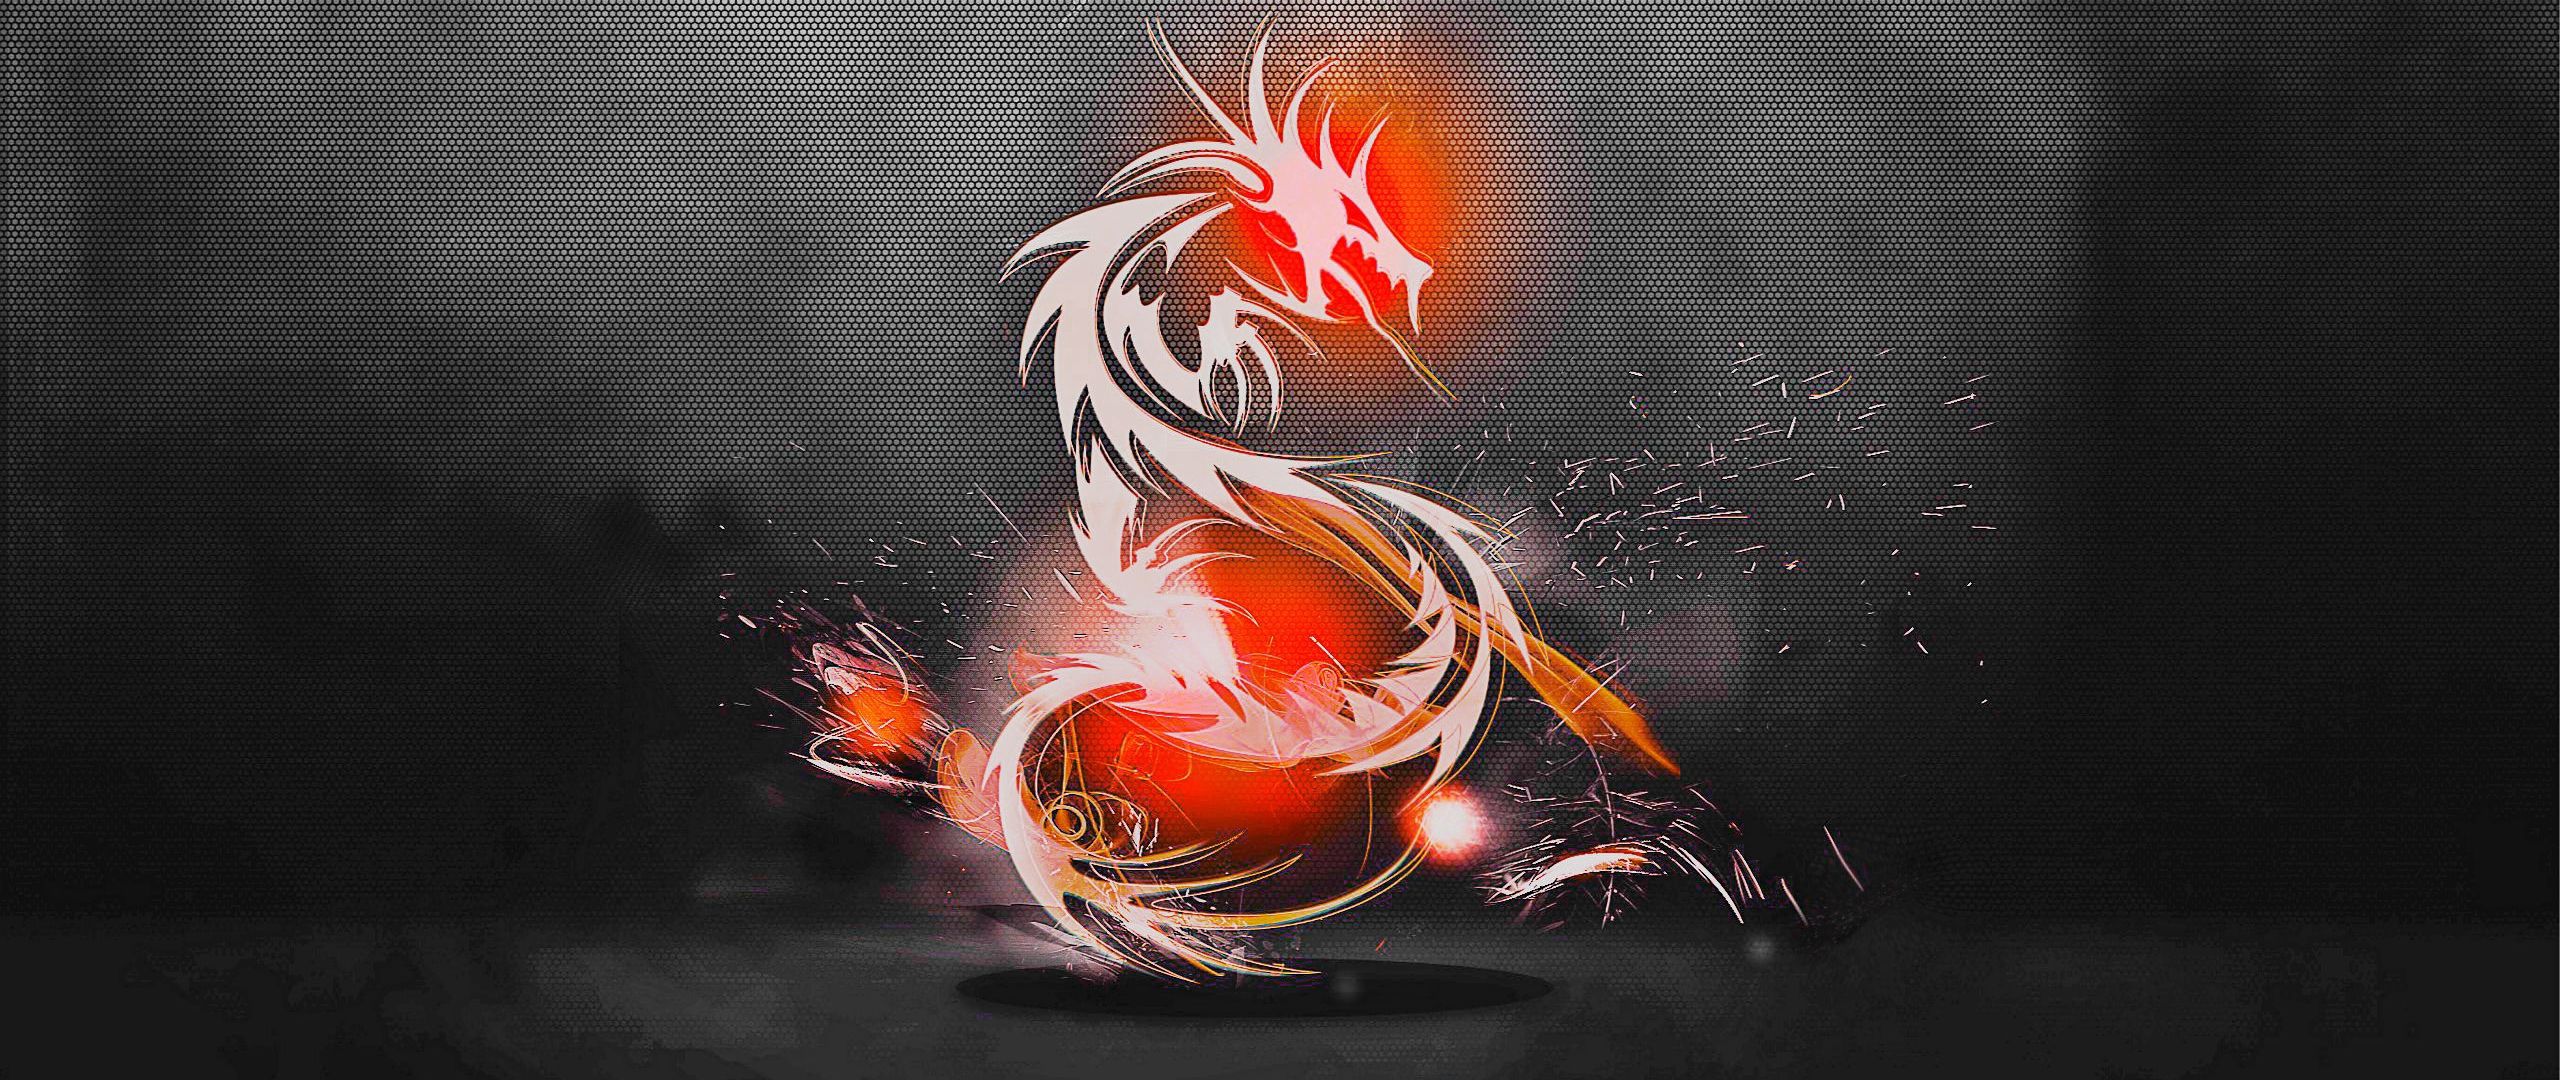 Download wallpaper 2560x1080 dragon, background, light, shadow dual wide 1080p HD background